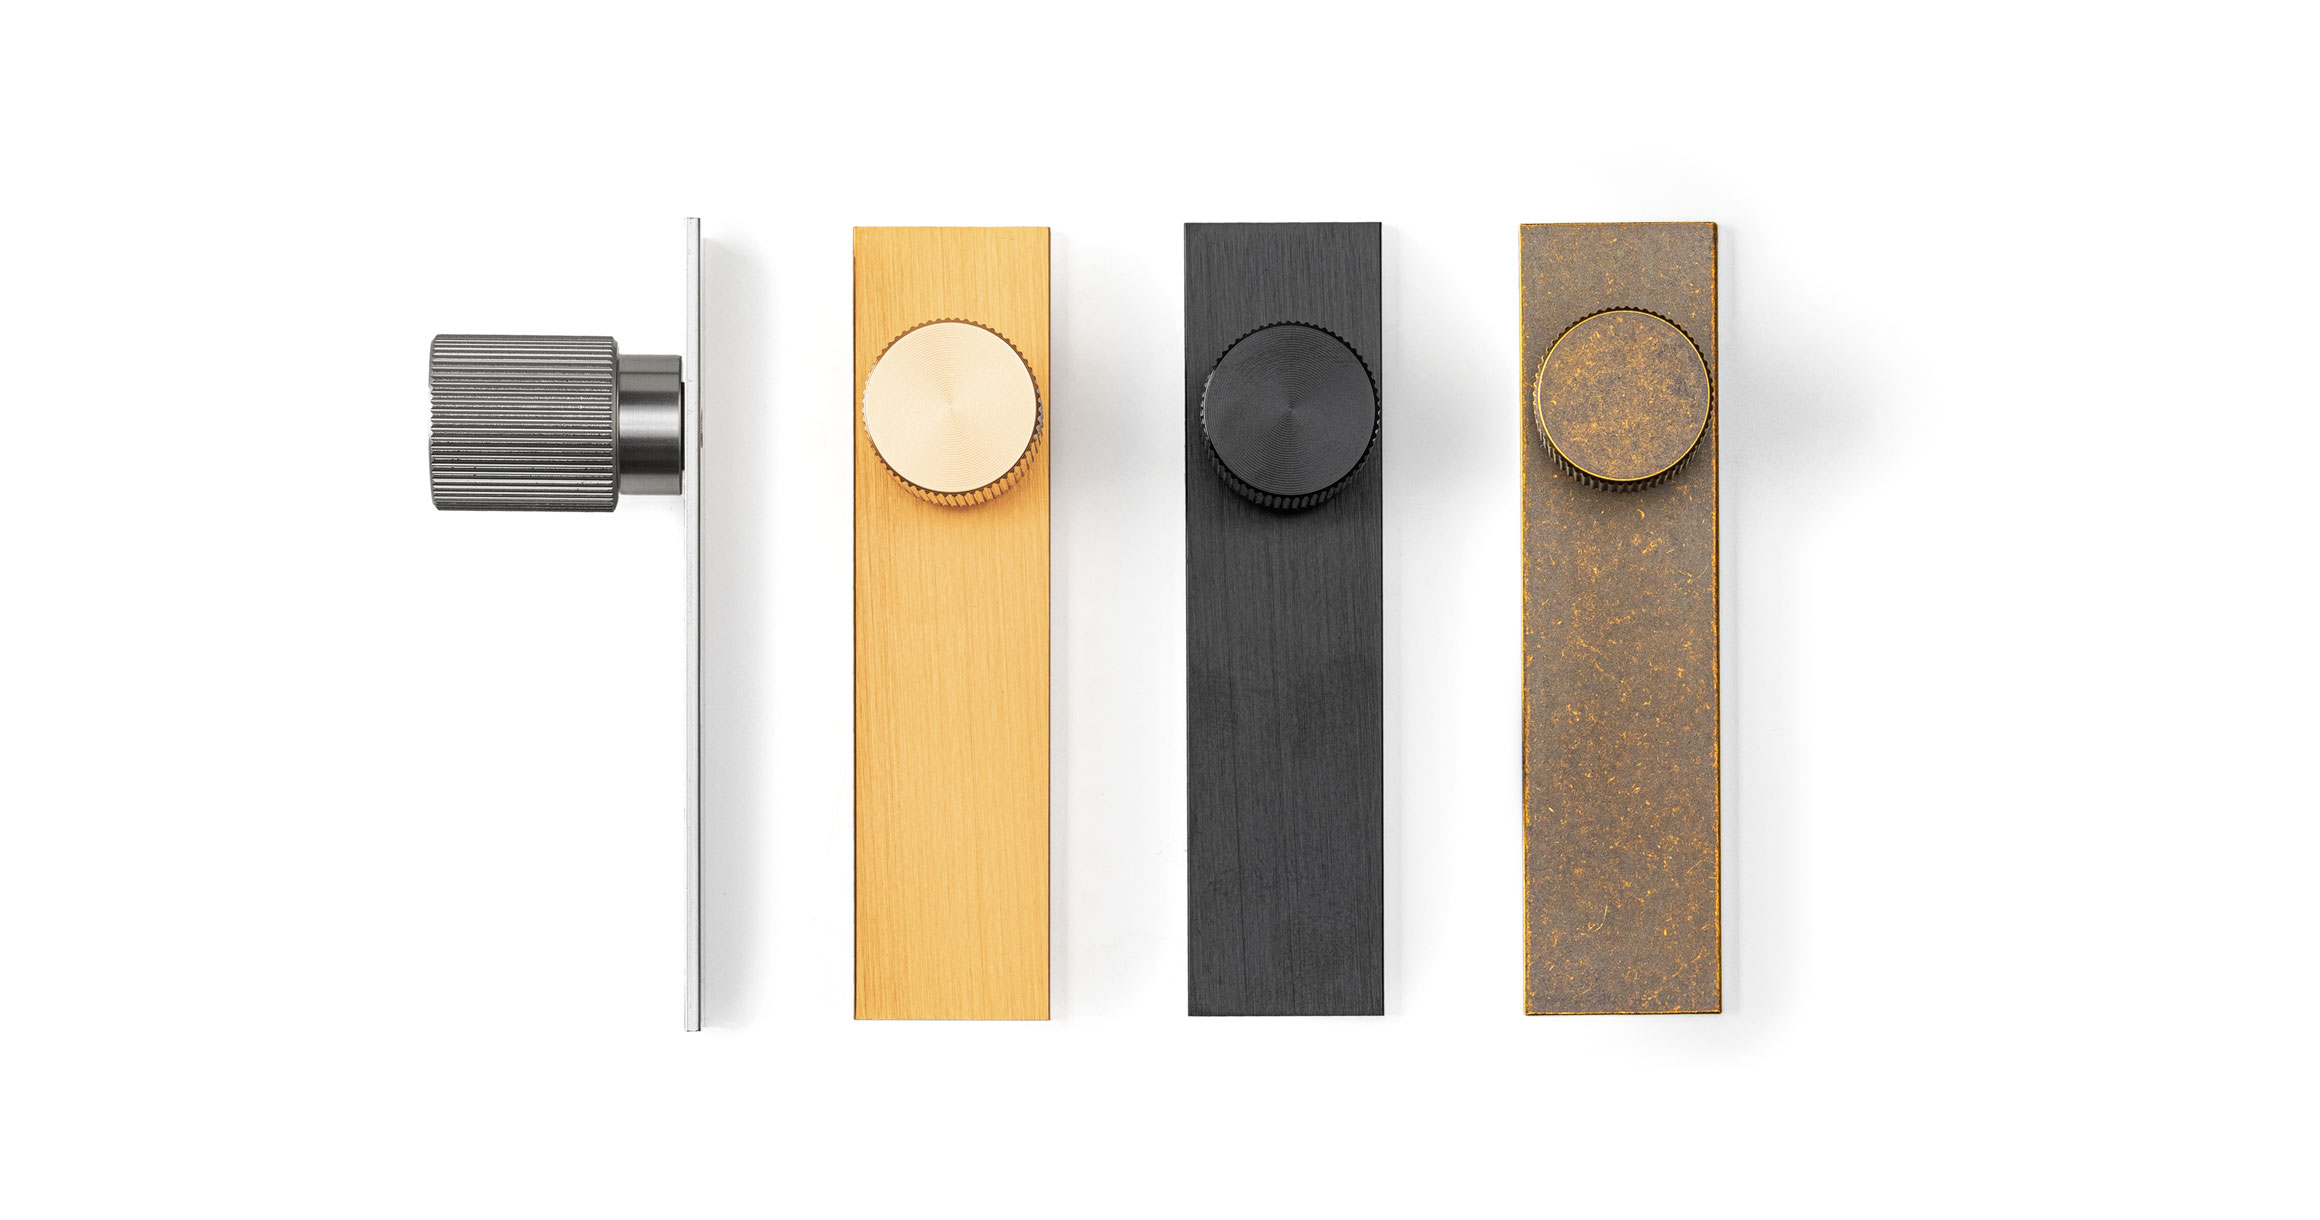 The Arpa door stopper: a new dimension for your floors - Viefe handles